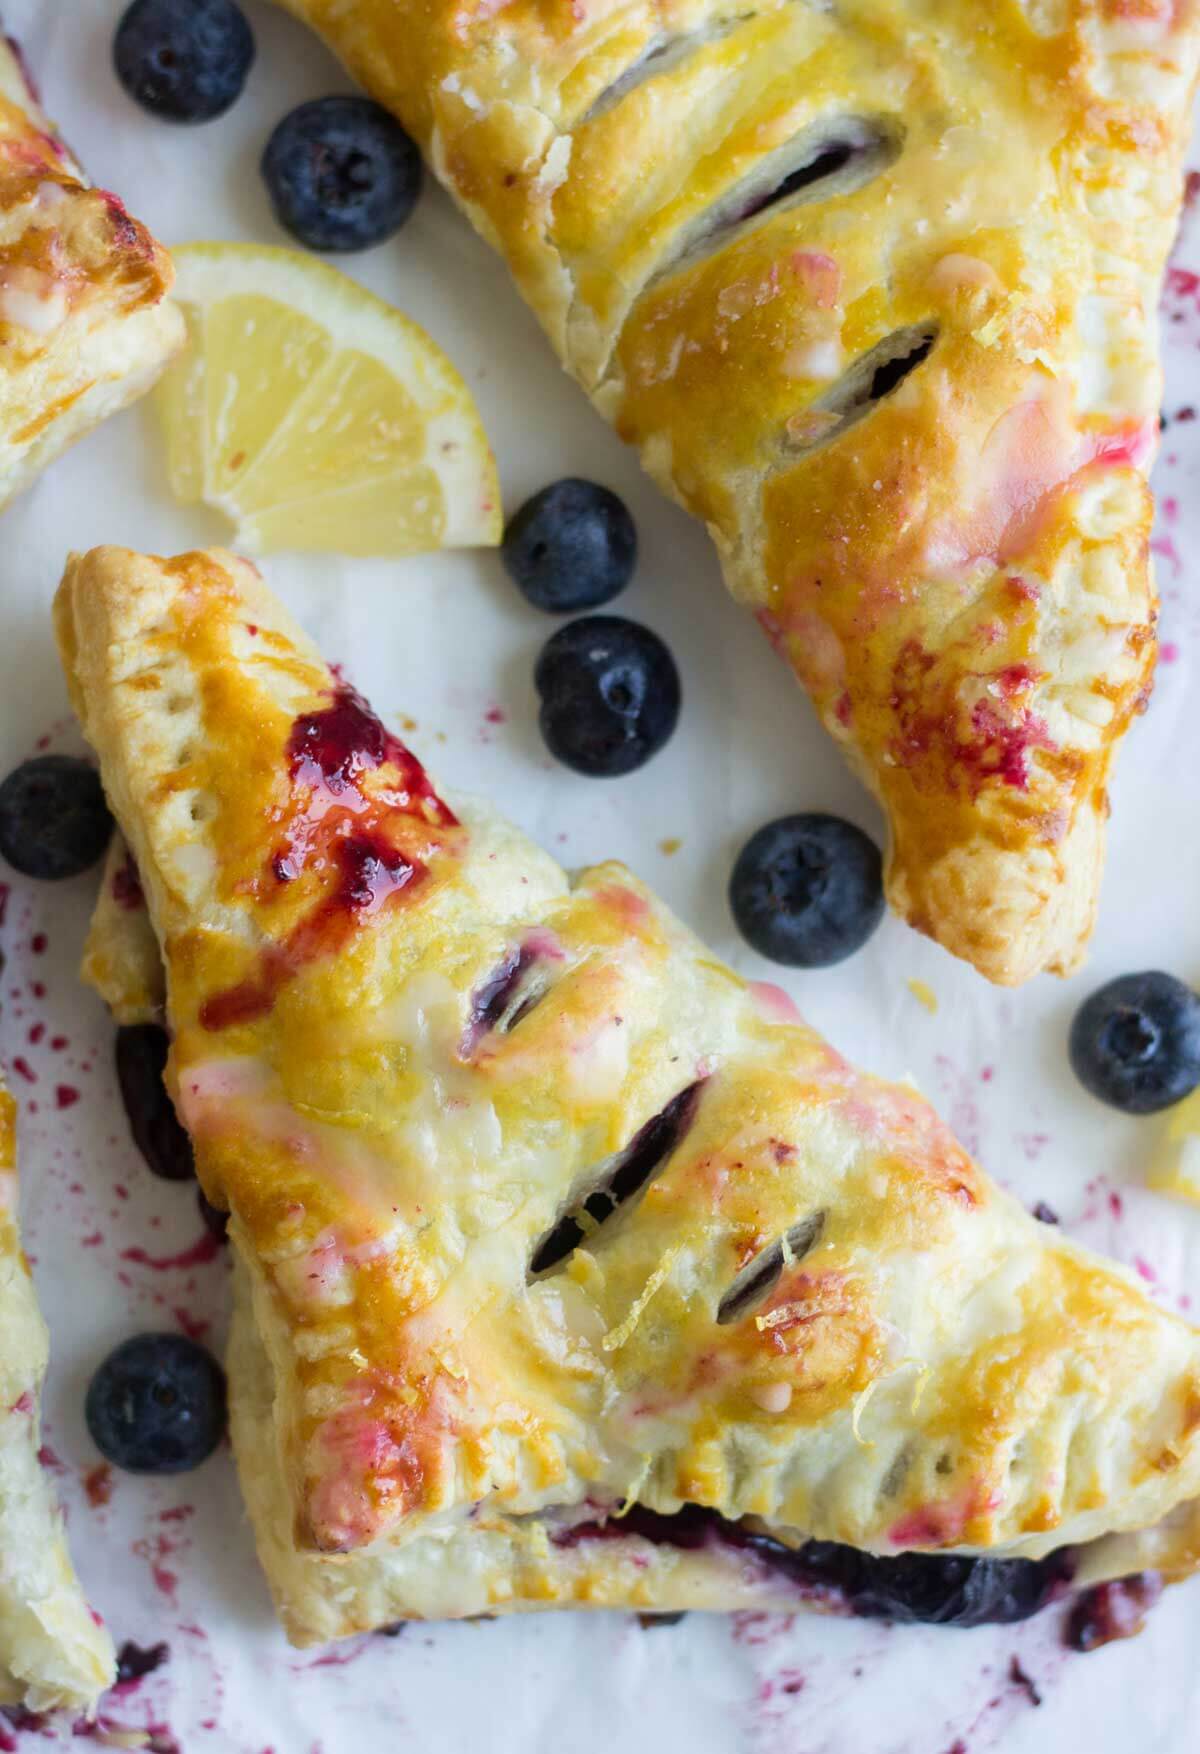 a blueberry turnover laying on parmchment paper surrounded by fresh blueberries